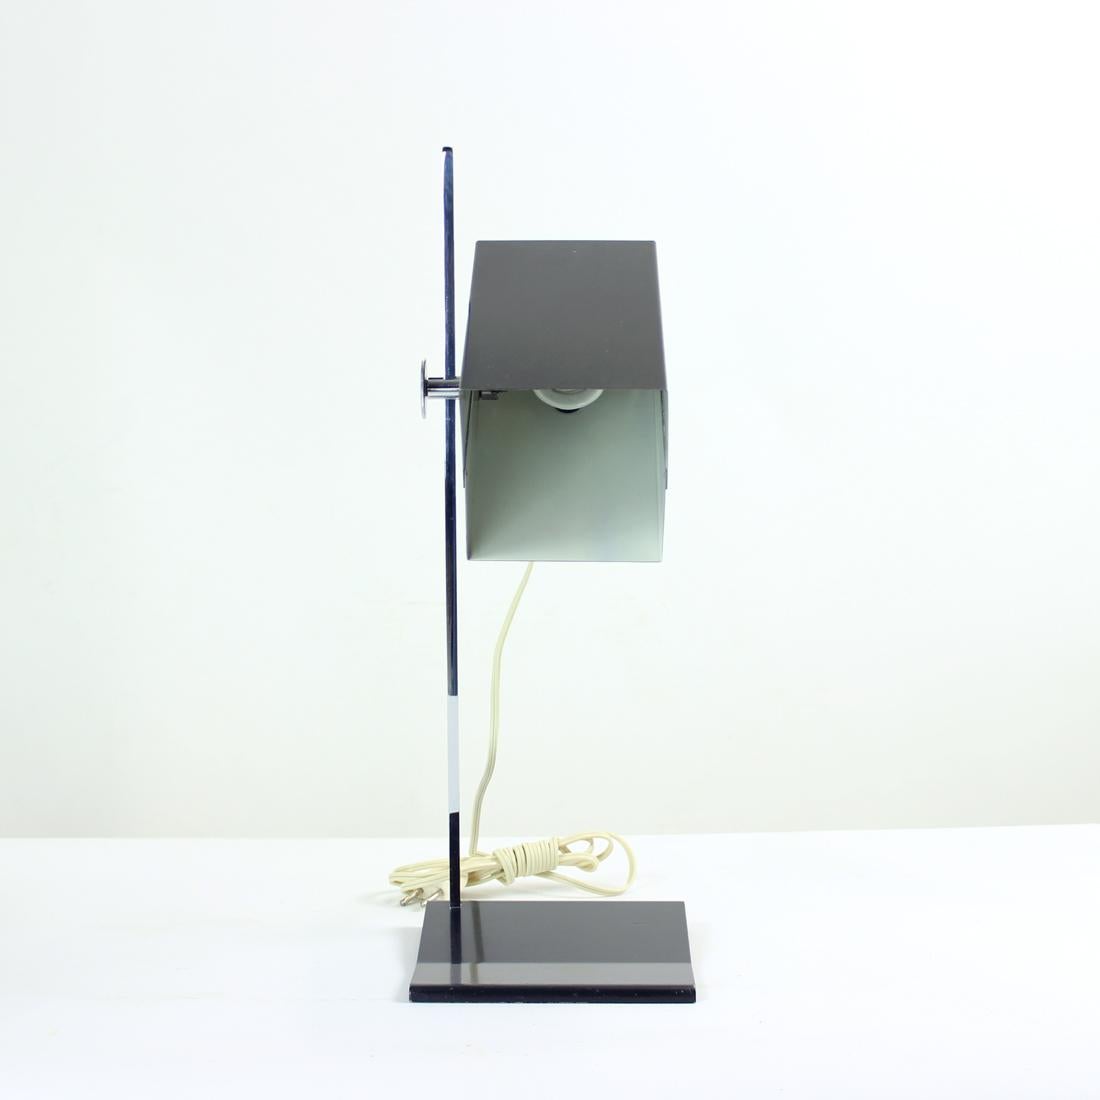 Mid-20th Century 1960s Napako Table Lamp in Chrome & Black Metal, Type 0815, Czechoslovakia For Sale